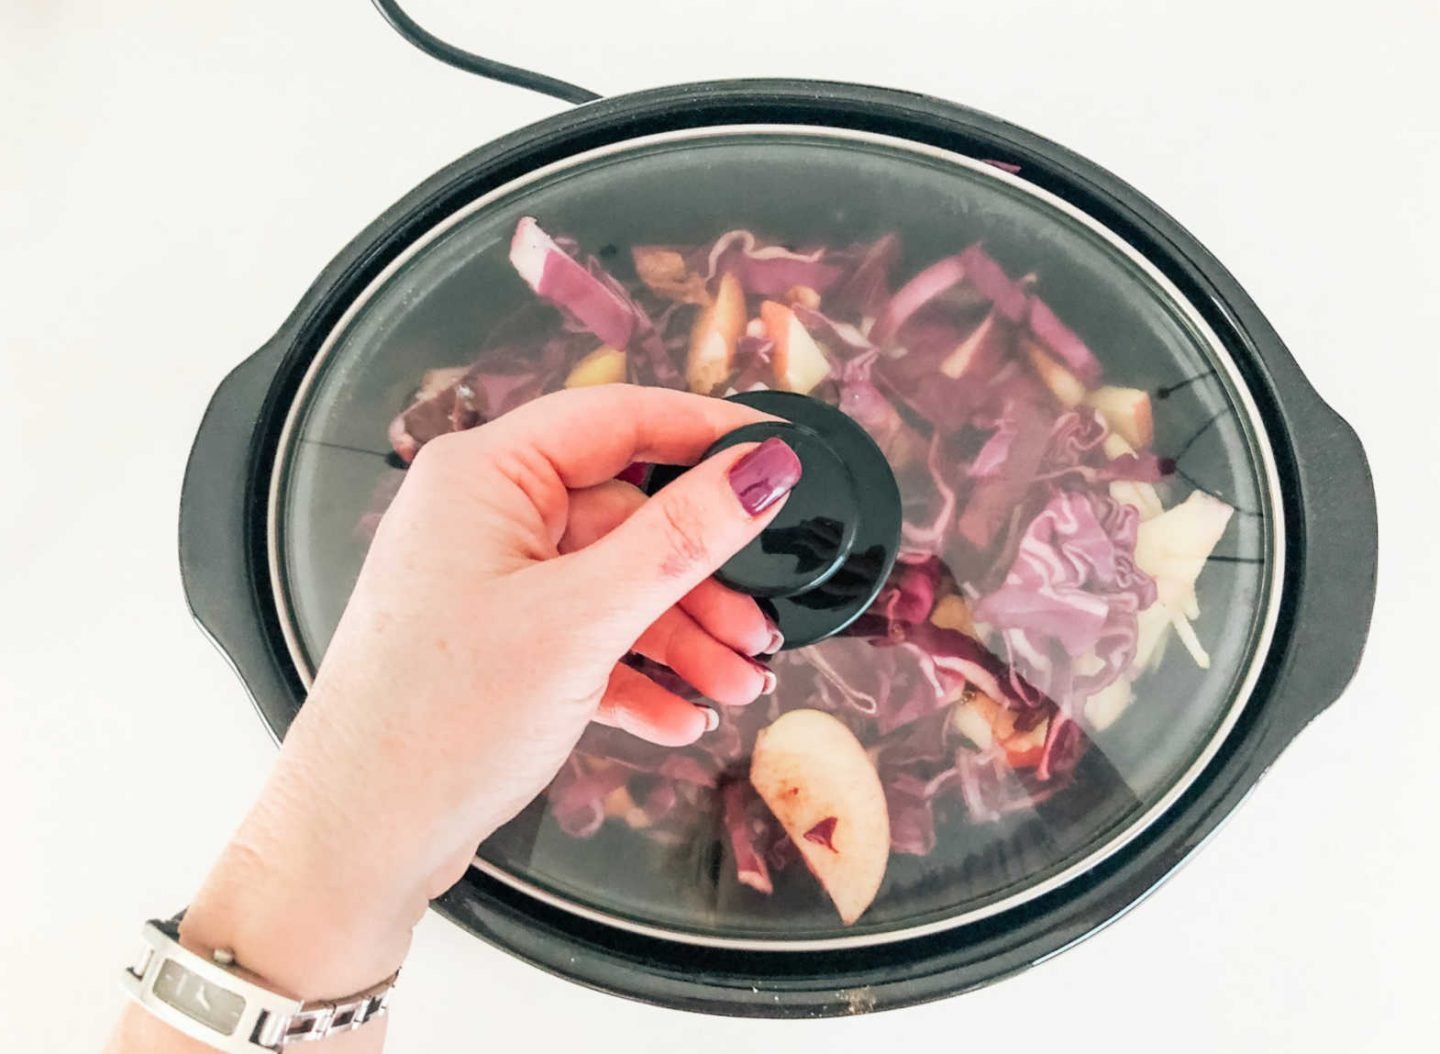 Red cabbage cooked in a slow cooker